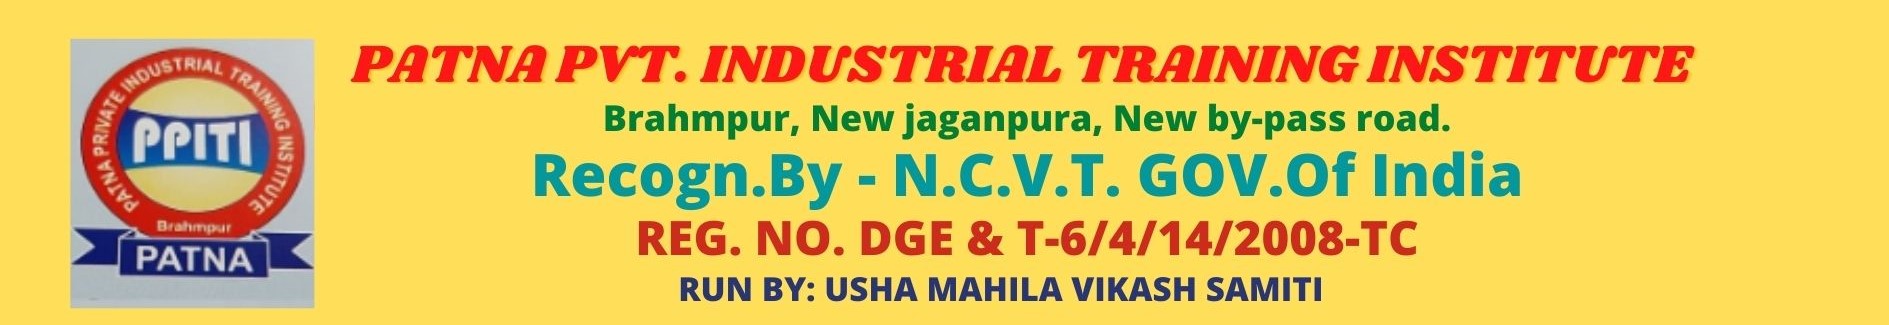 Patna Industrial Training Institute in Bypass, Patna